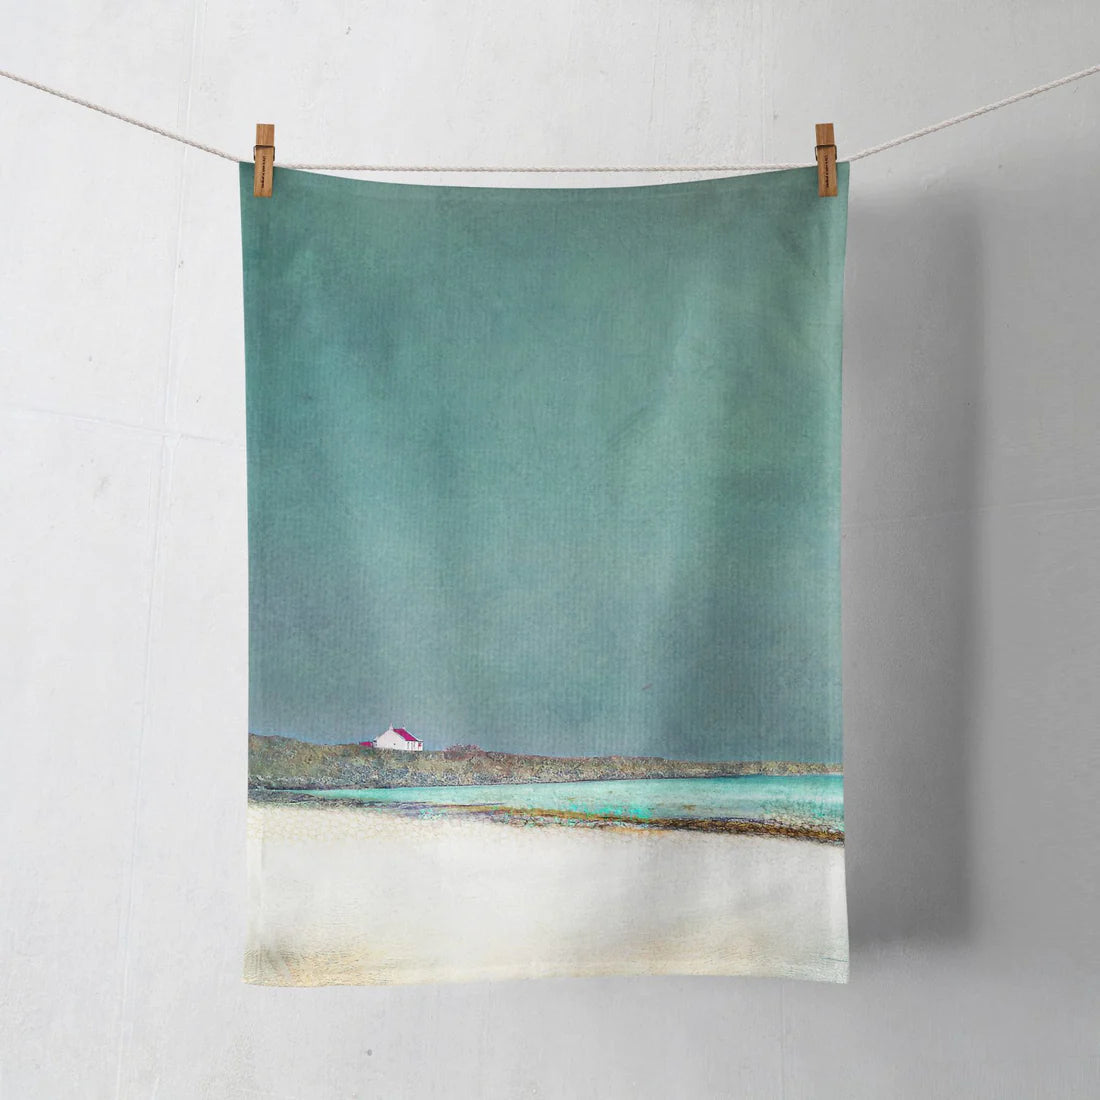 Tea towel with a print of a seascape from the Isle of Barra in teal blues